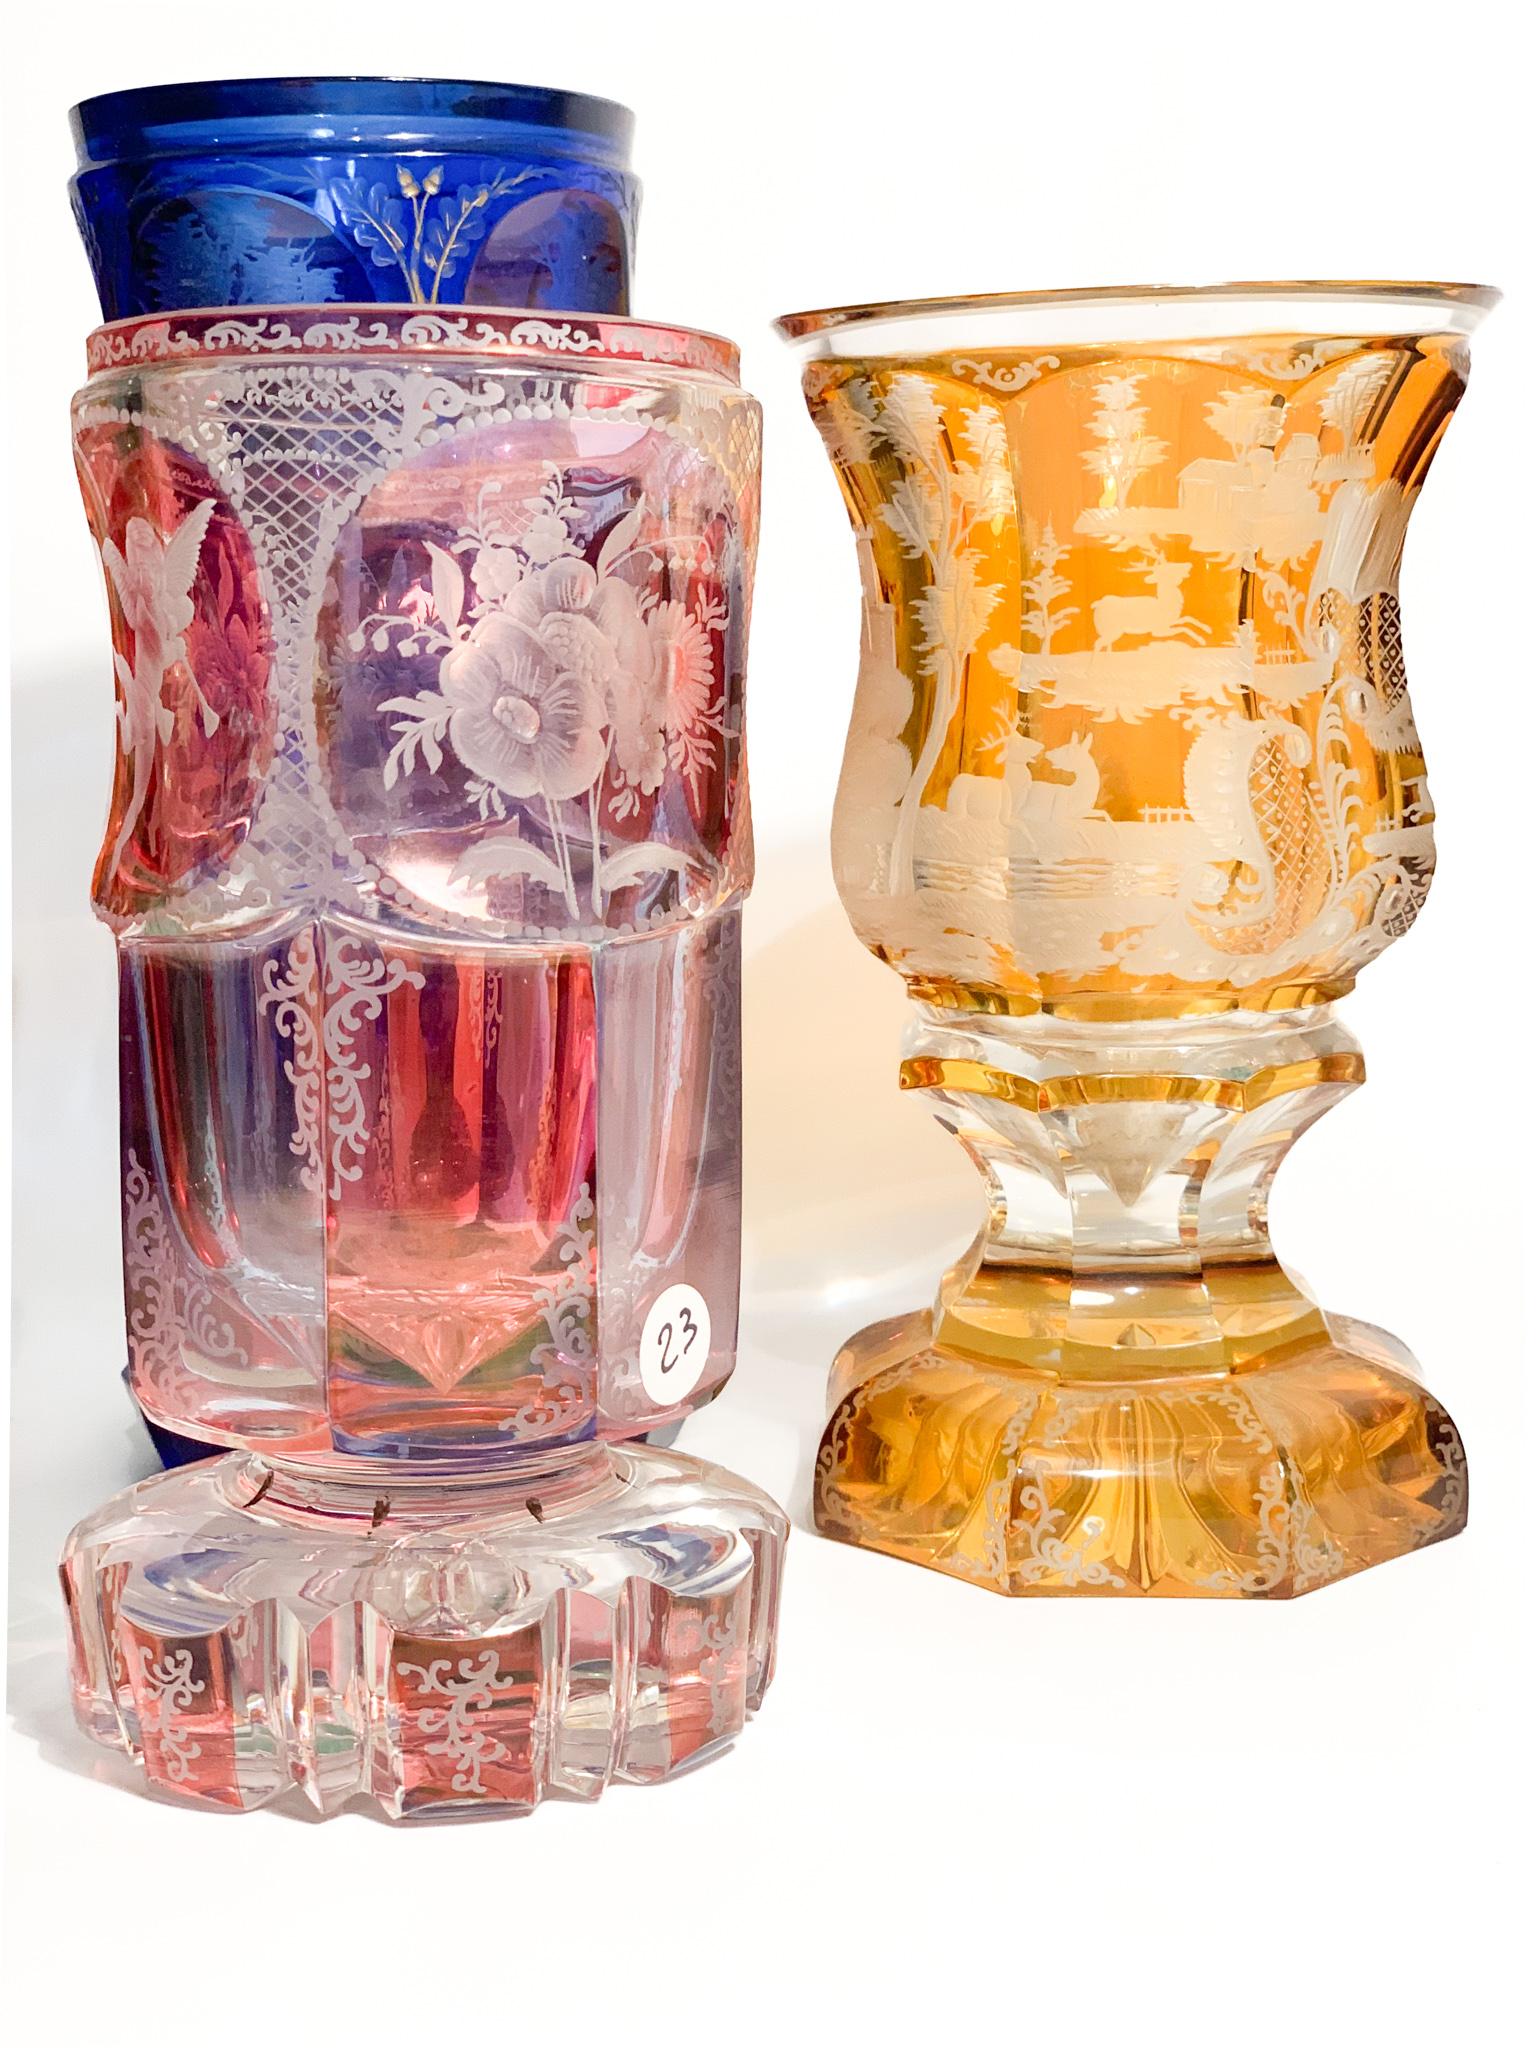 Pink and Purple Biedermeier Crystal Glass Decorated with Acid in 1800 13